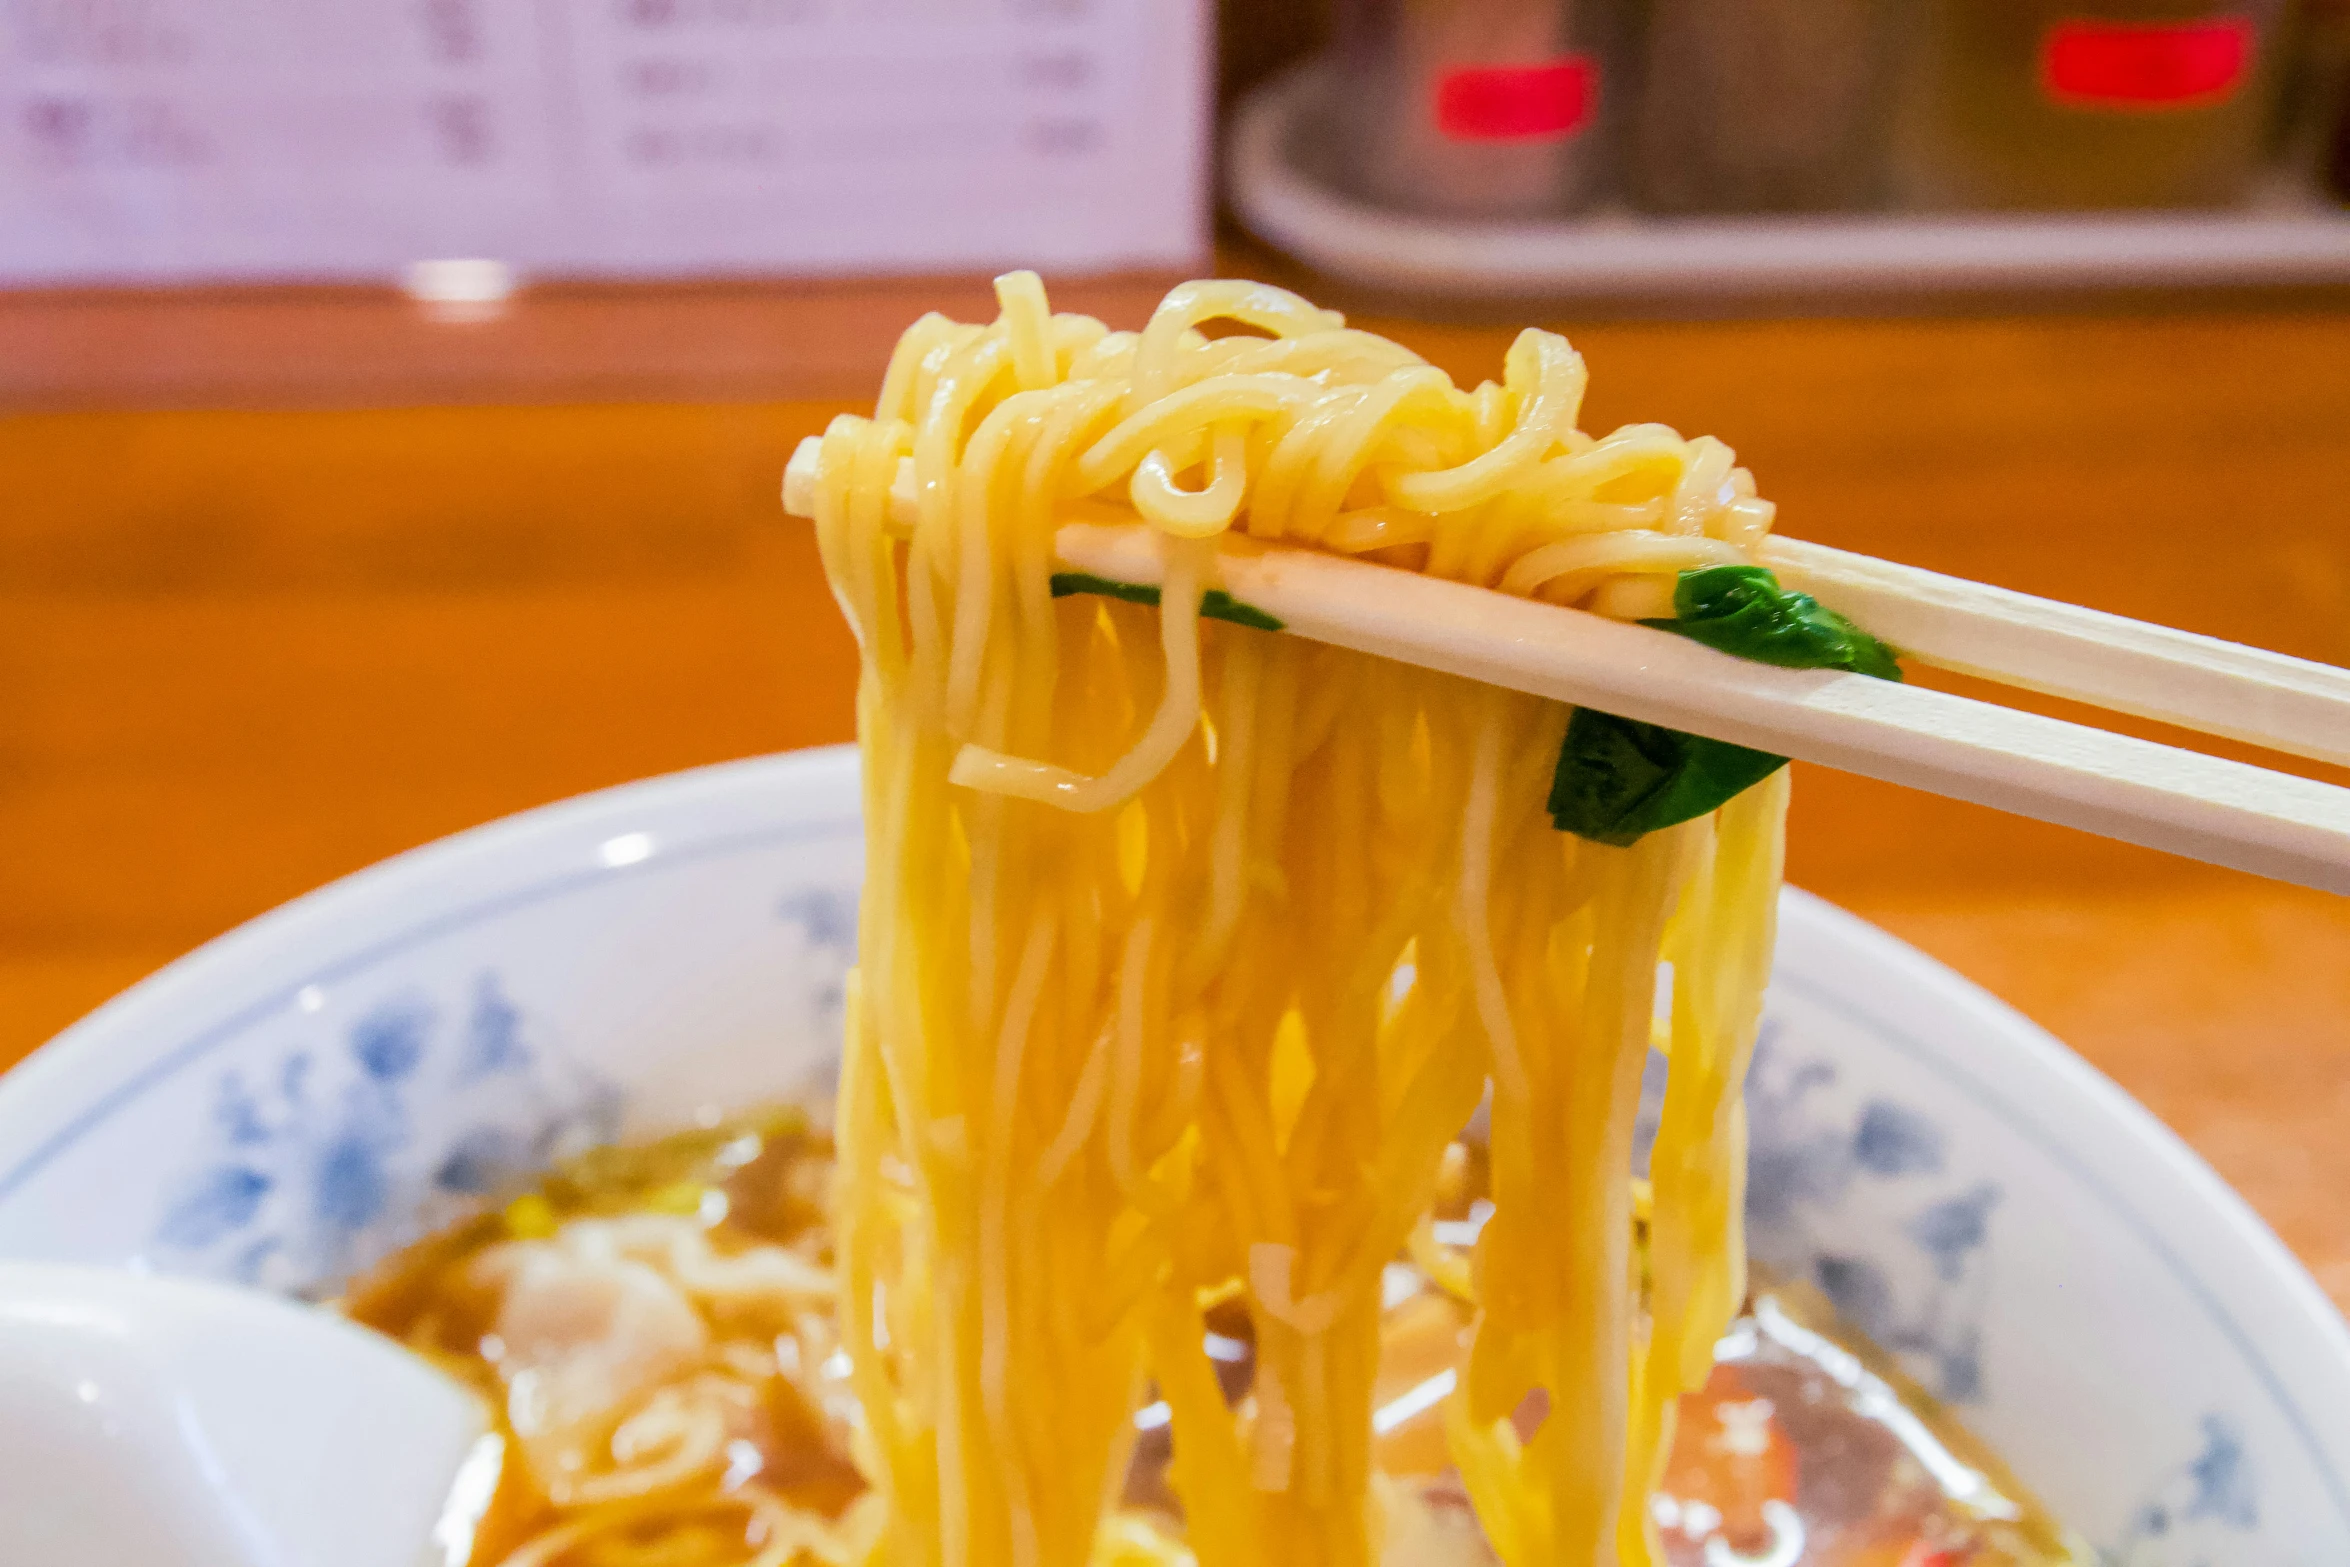 noodles being lifted from a bowl with chopsticks